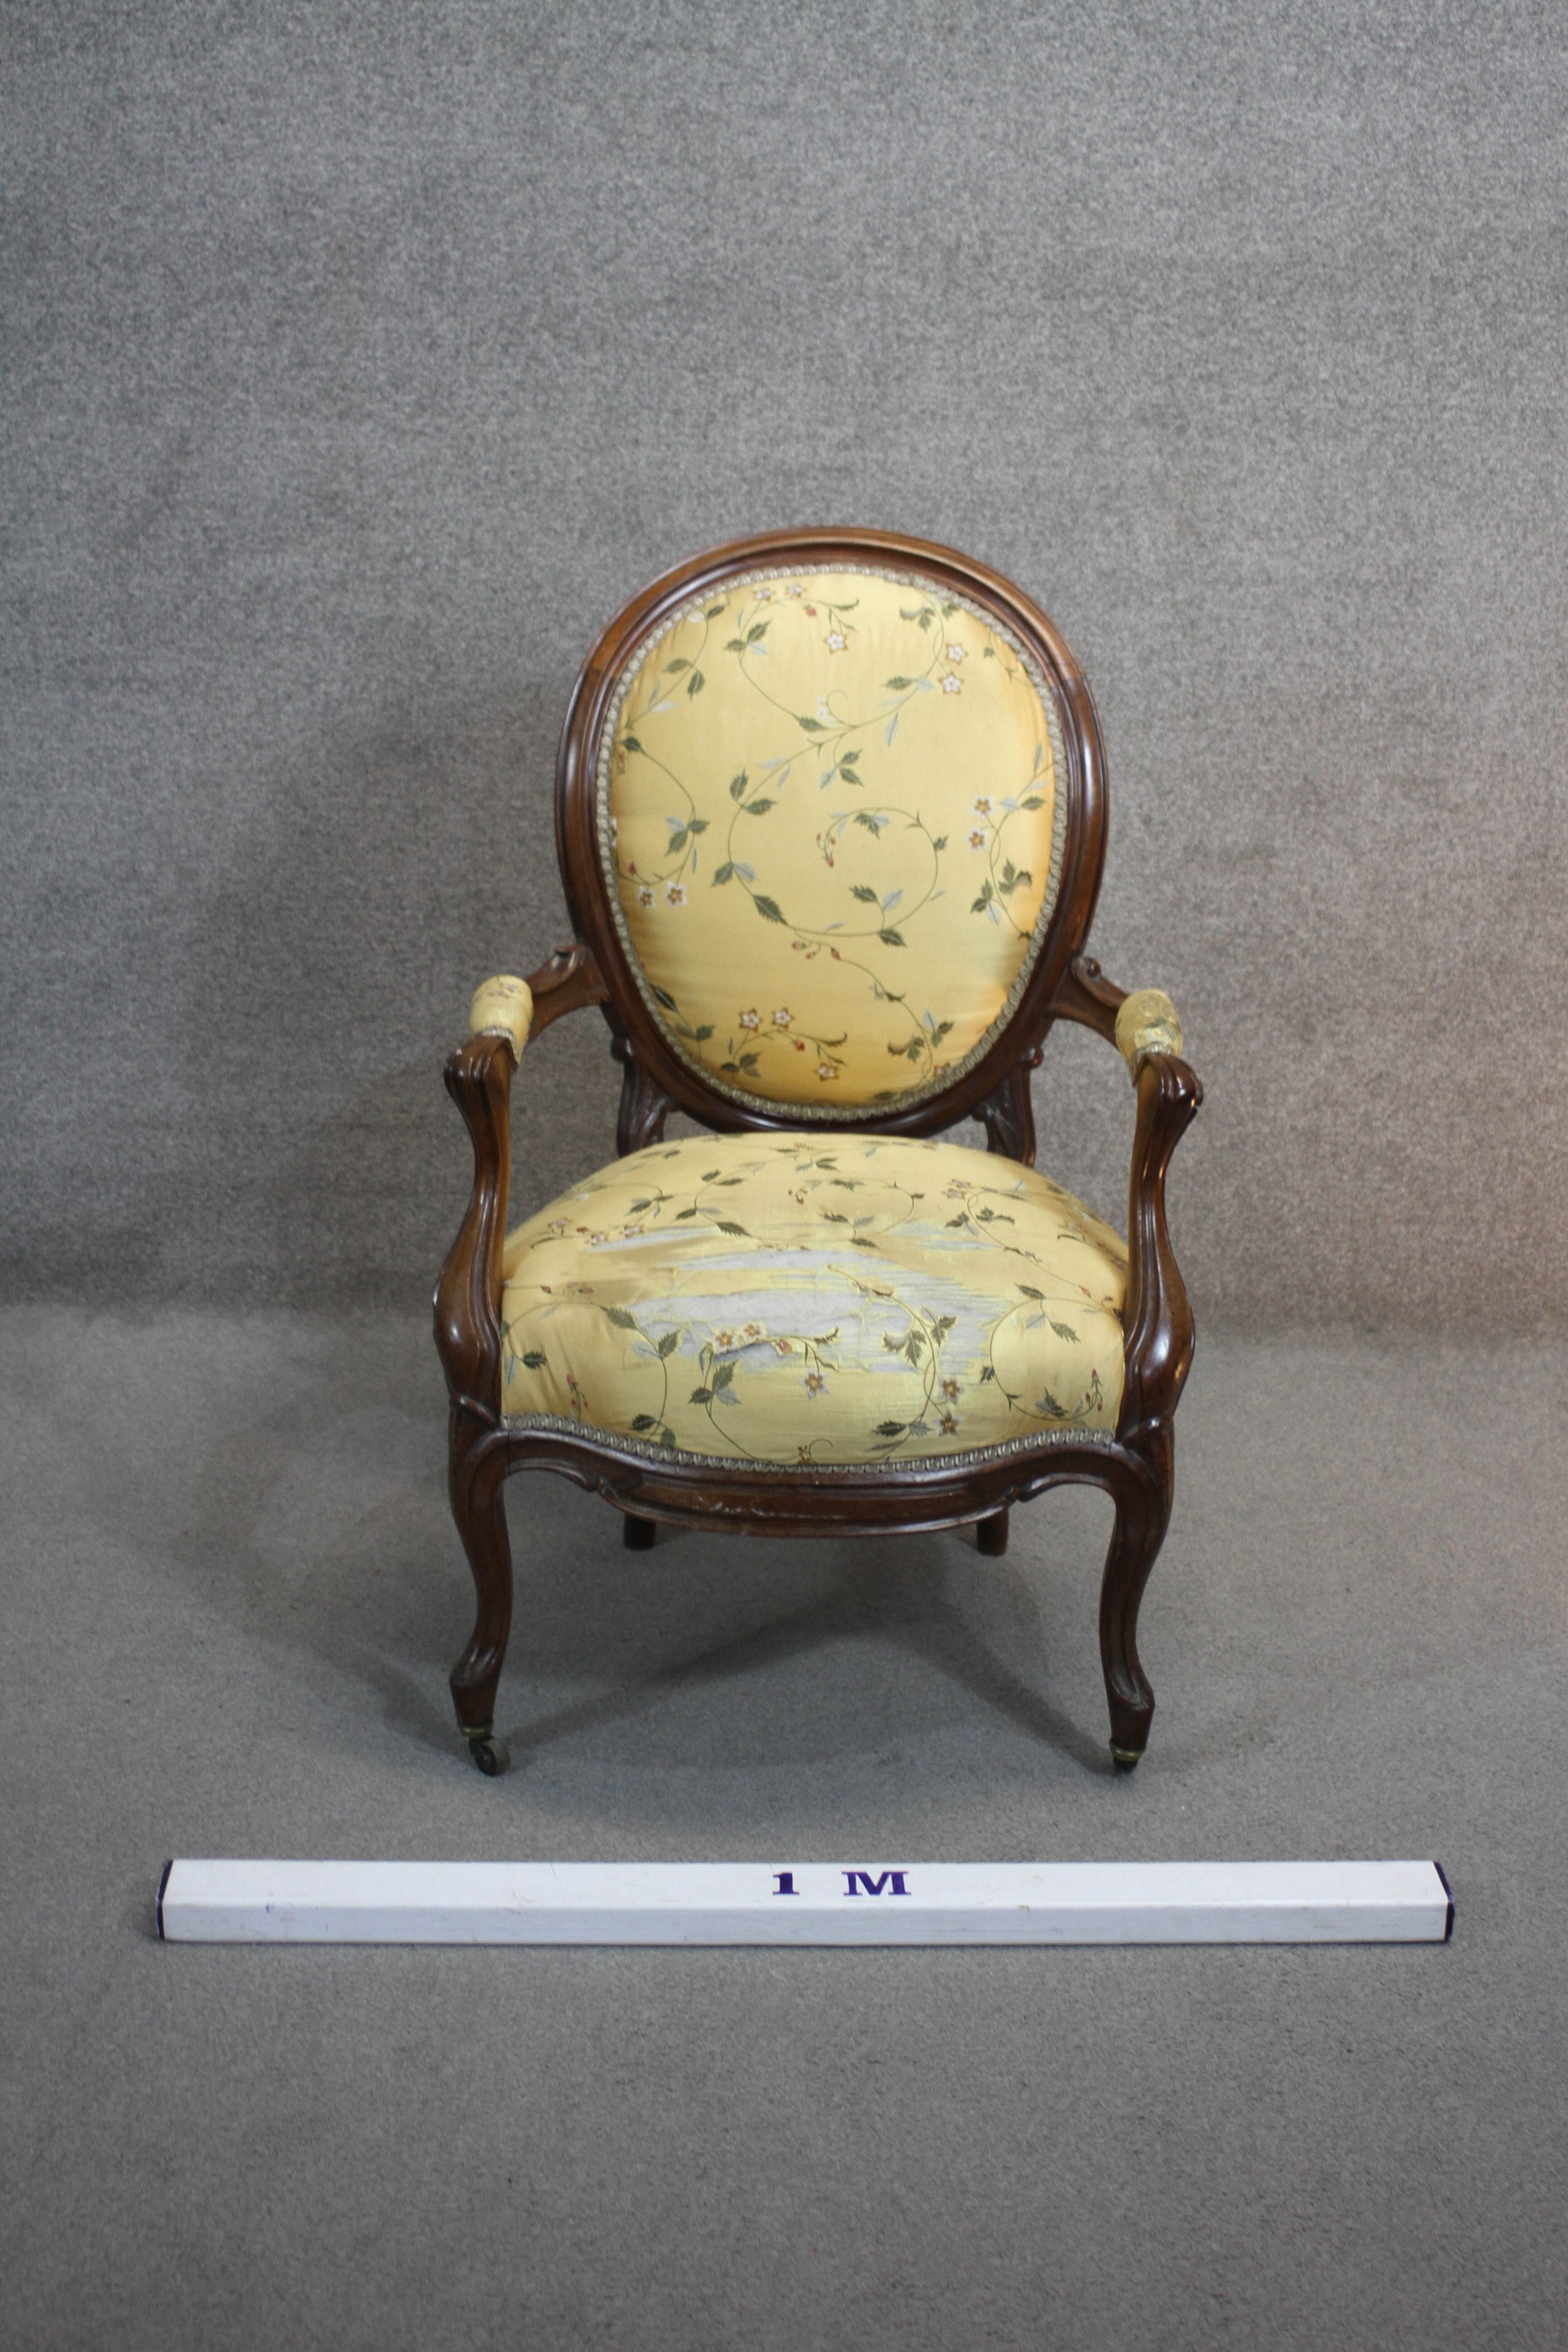 A 19th century mahogany framed French style armchair in floral silk upholstery raised on cabriole - Image 2 of 4